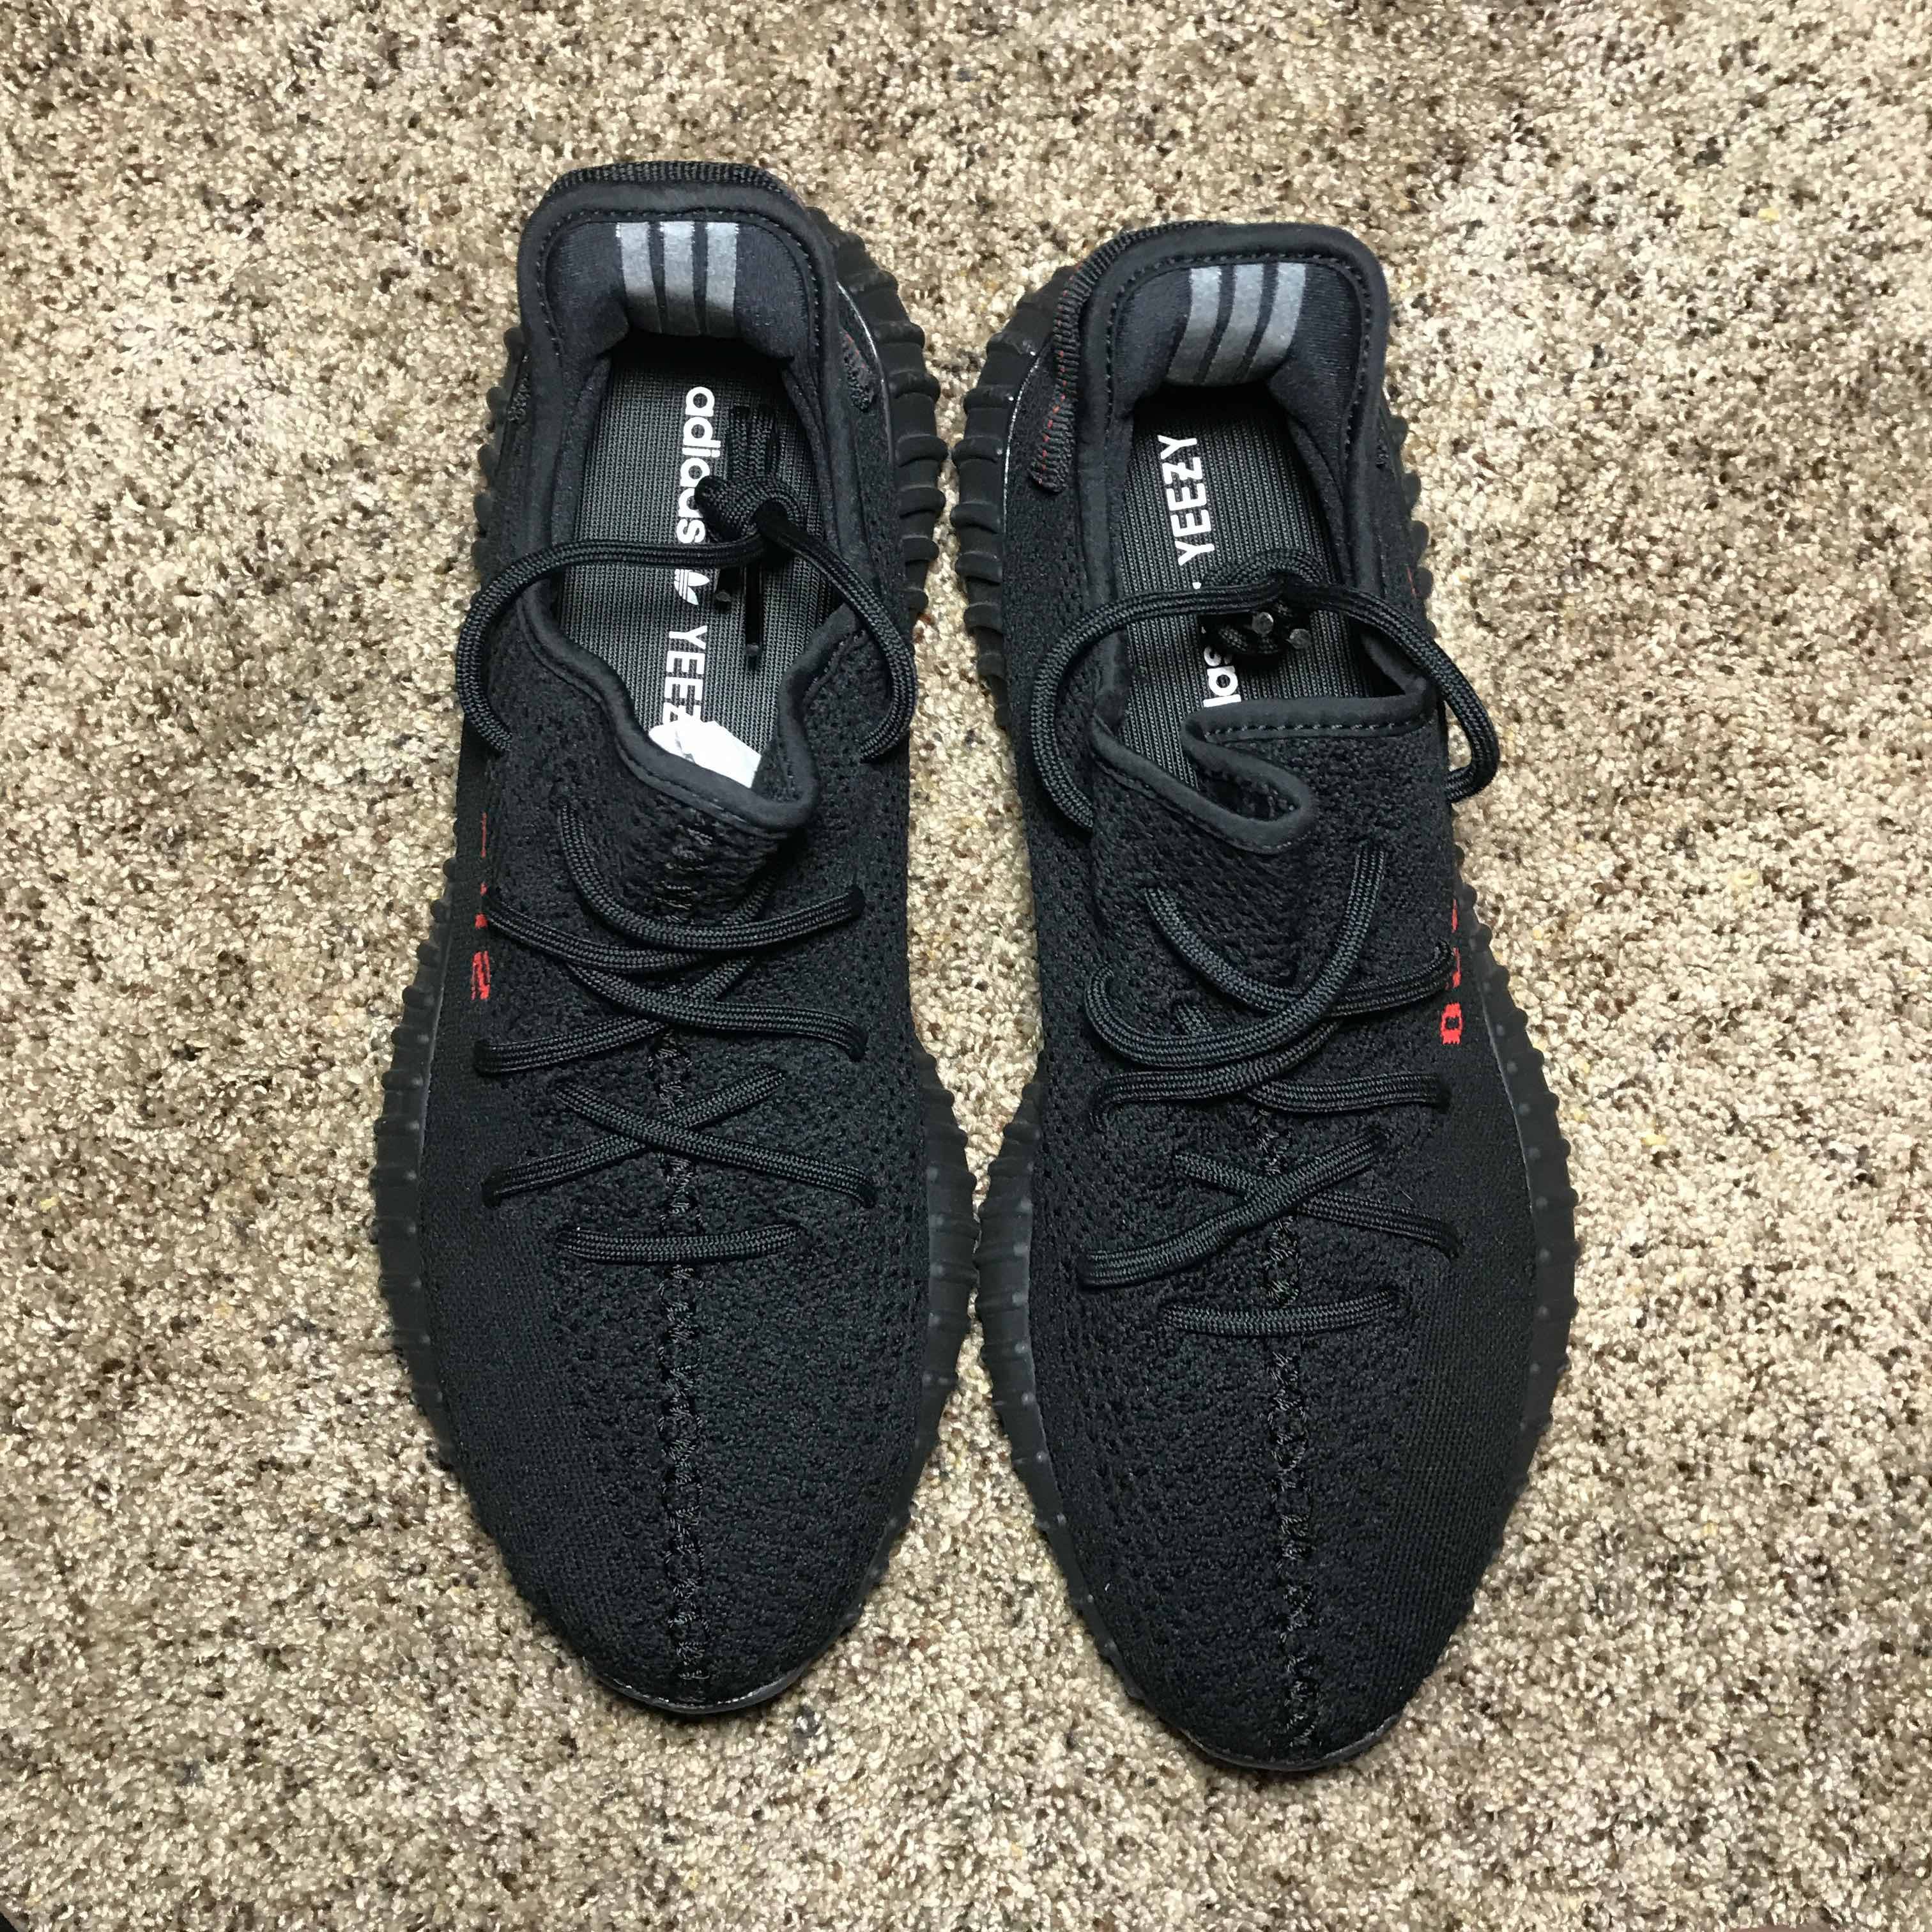 Cheap Ad Yeezy 350 Boost V2 Men Aaa Quality098